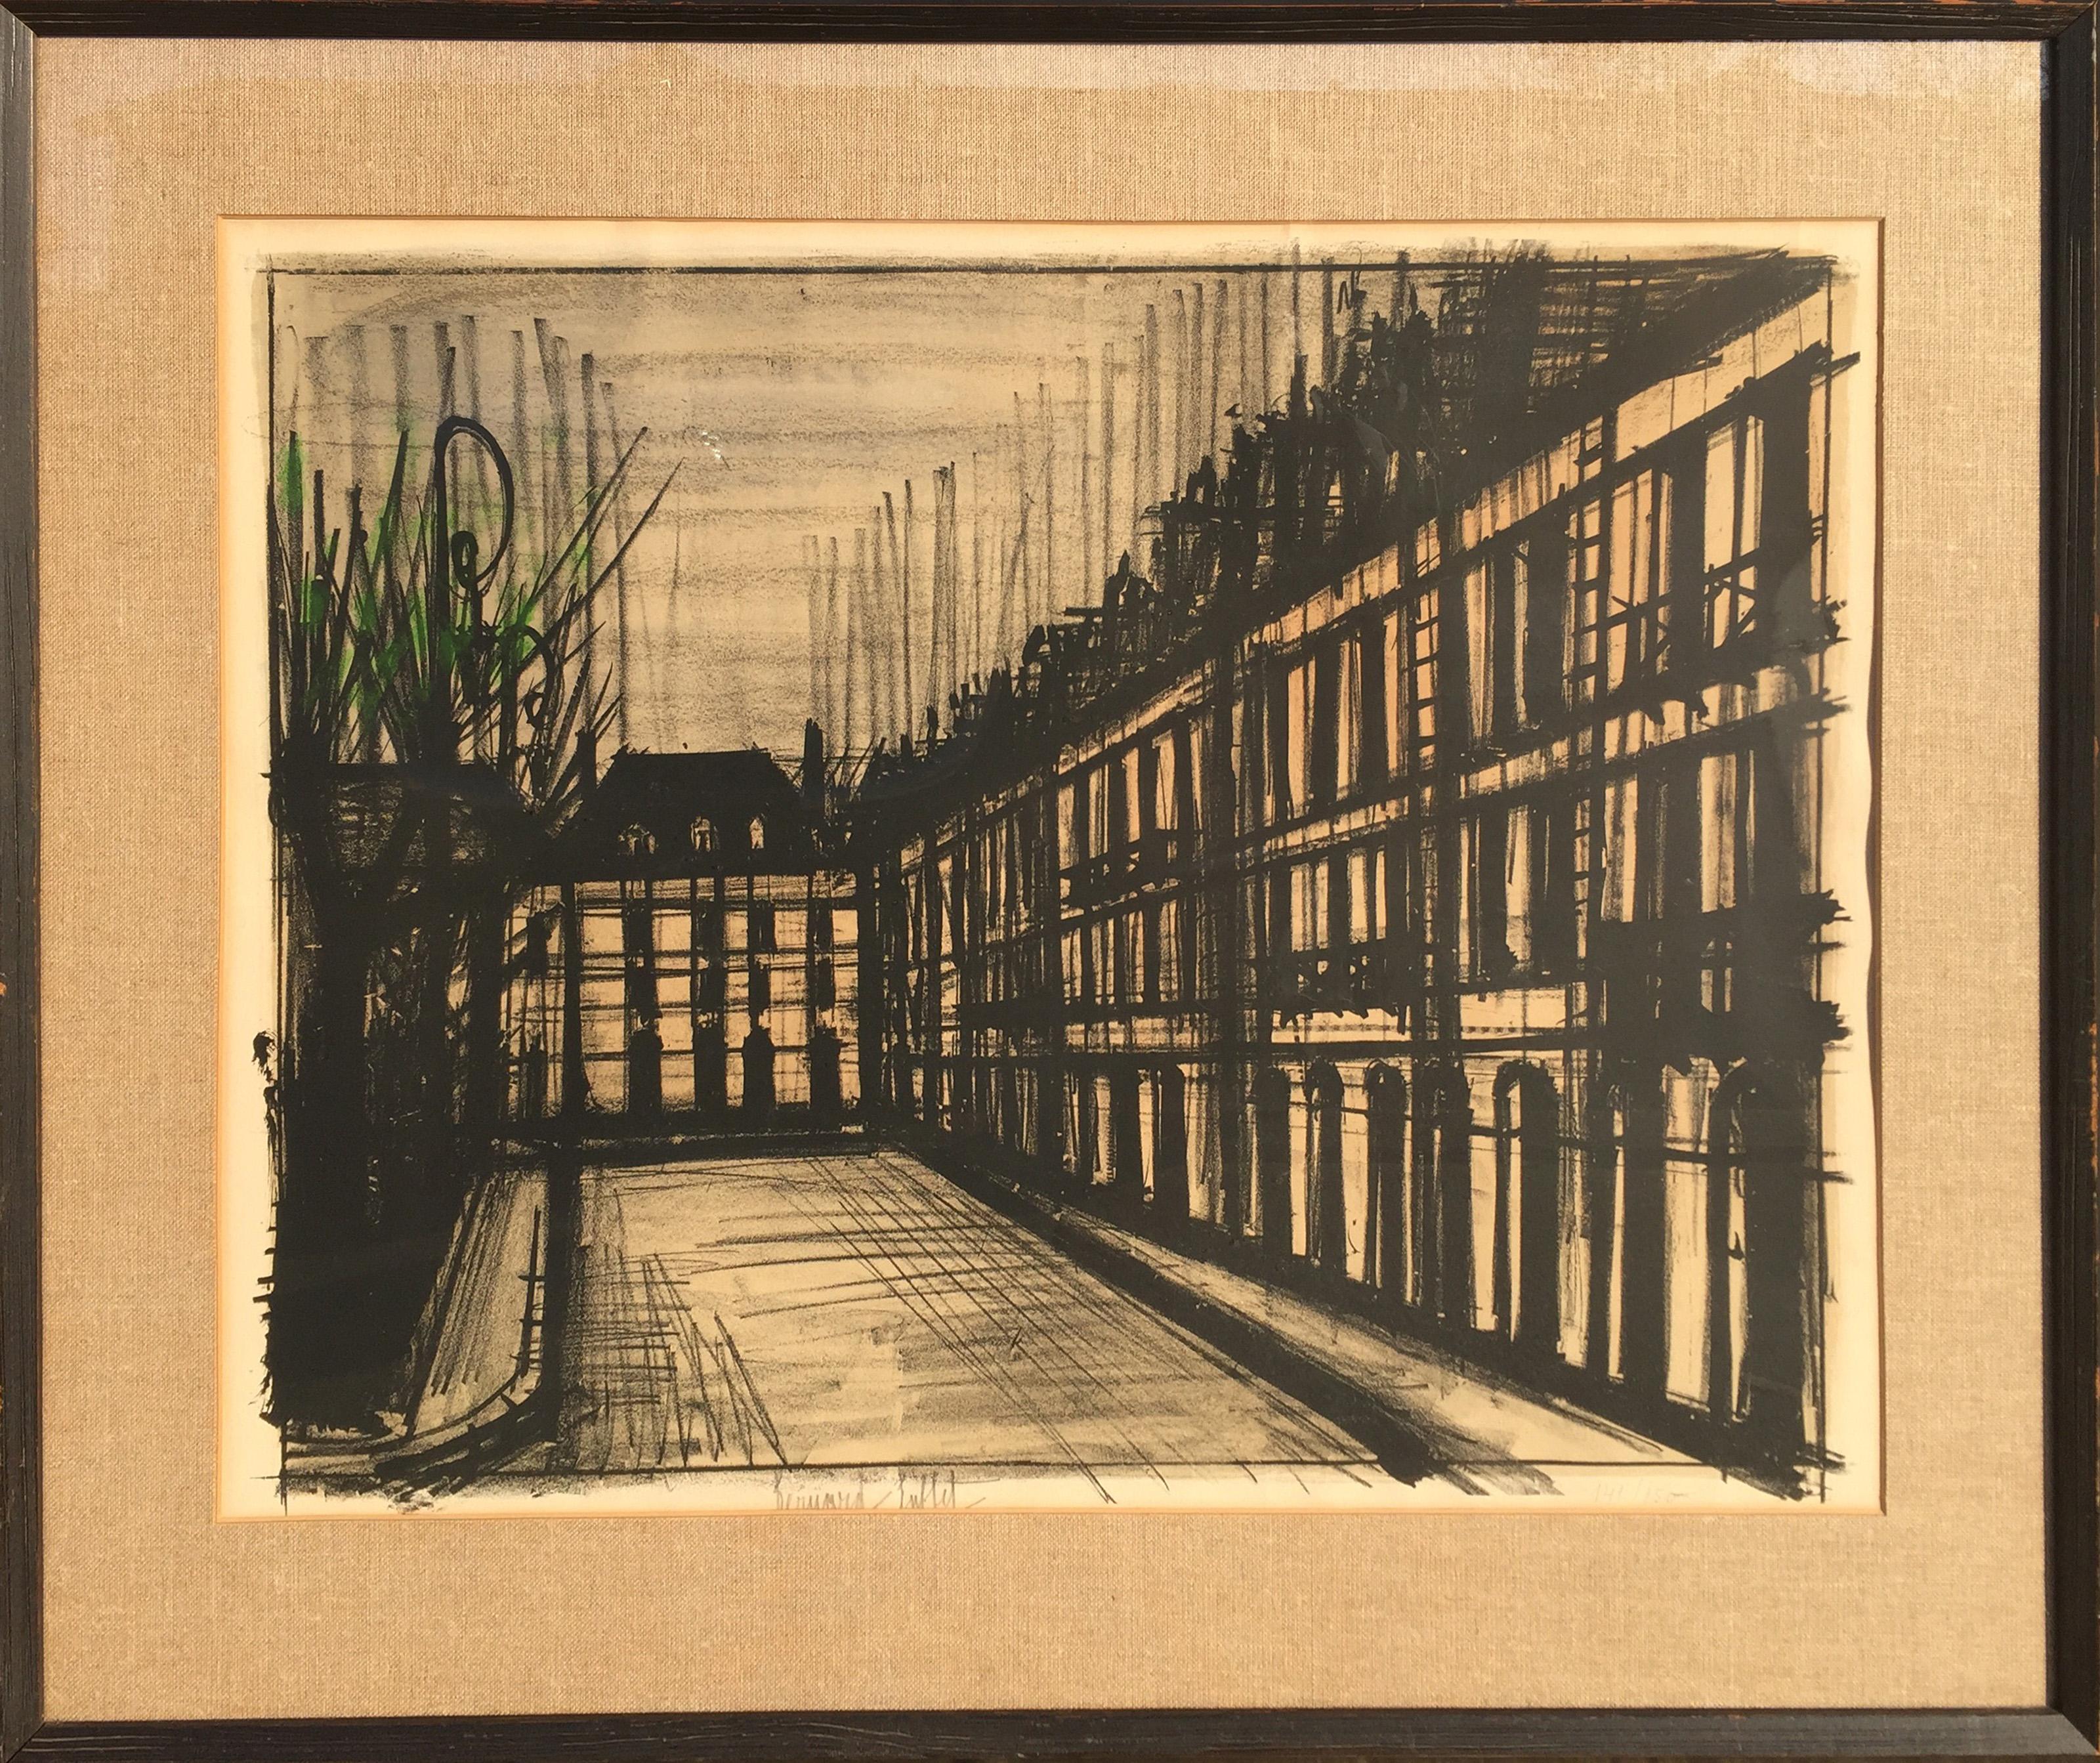 Bernard Buffet, French (1928 - 1999) -  La Place des Vosges. Year: 1962, Medium: Lithograph, signed and numbered in pencil, Edition: 141/150, Size: 21 x 27 in. (53.34 x 68.58 cm), Frame Size: 30 x 35 inches, Description: A modern Parisian cityscape